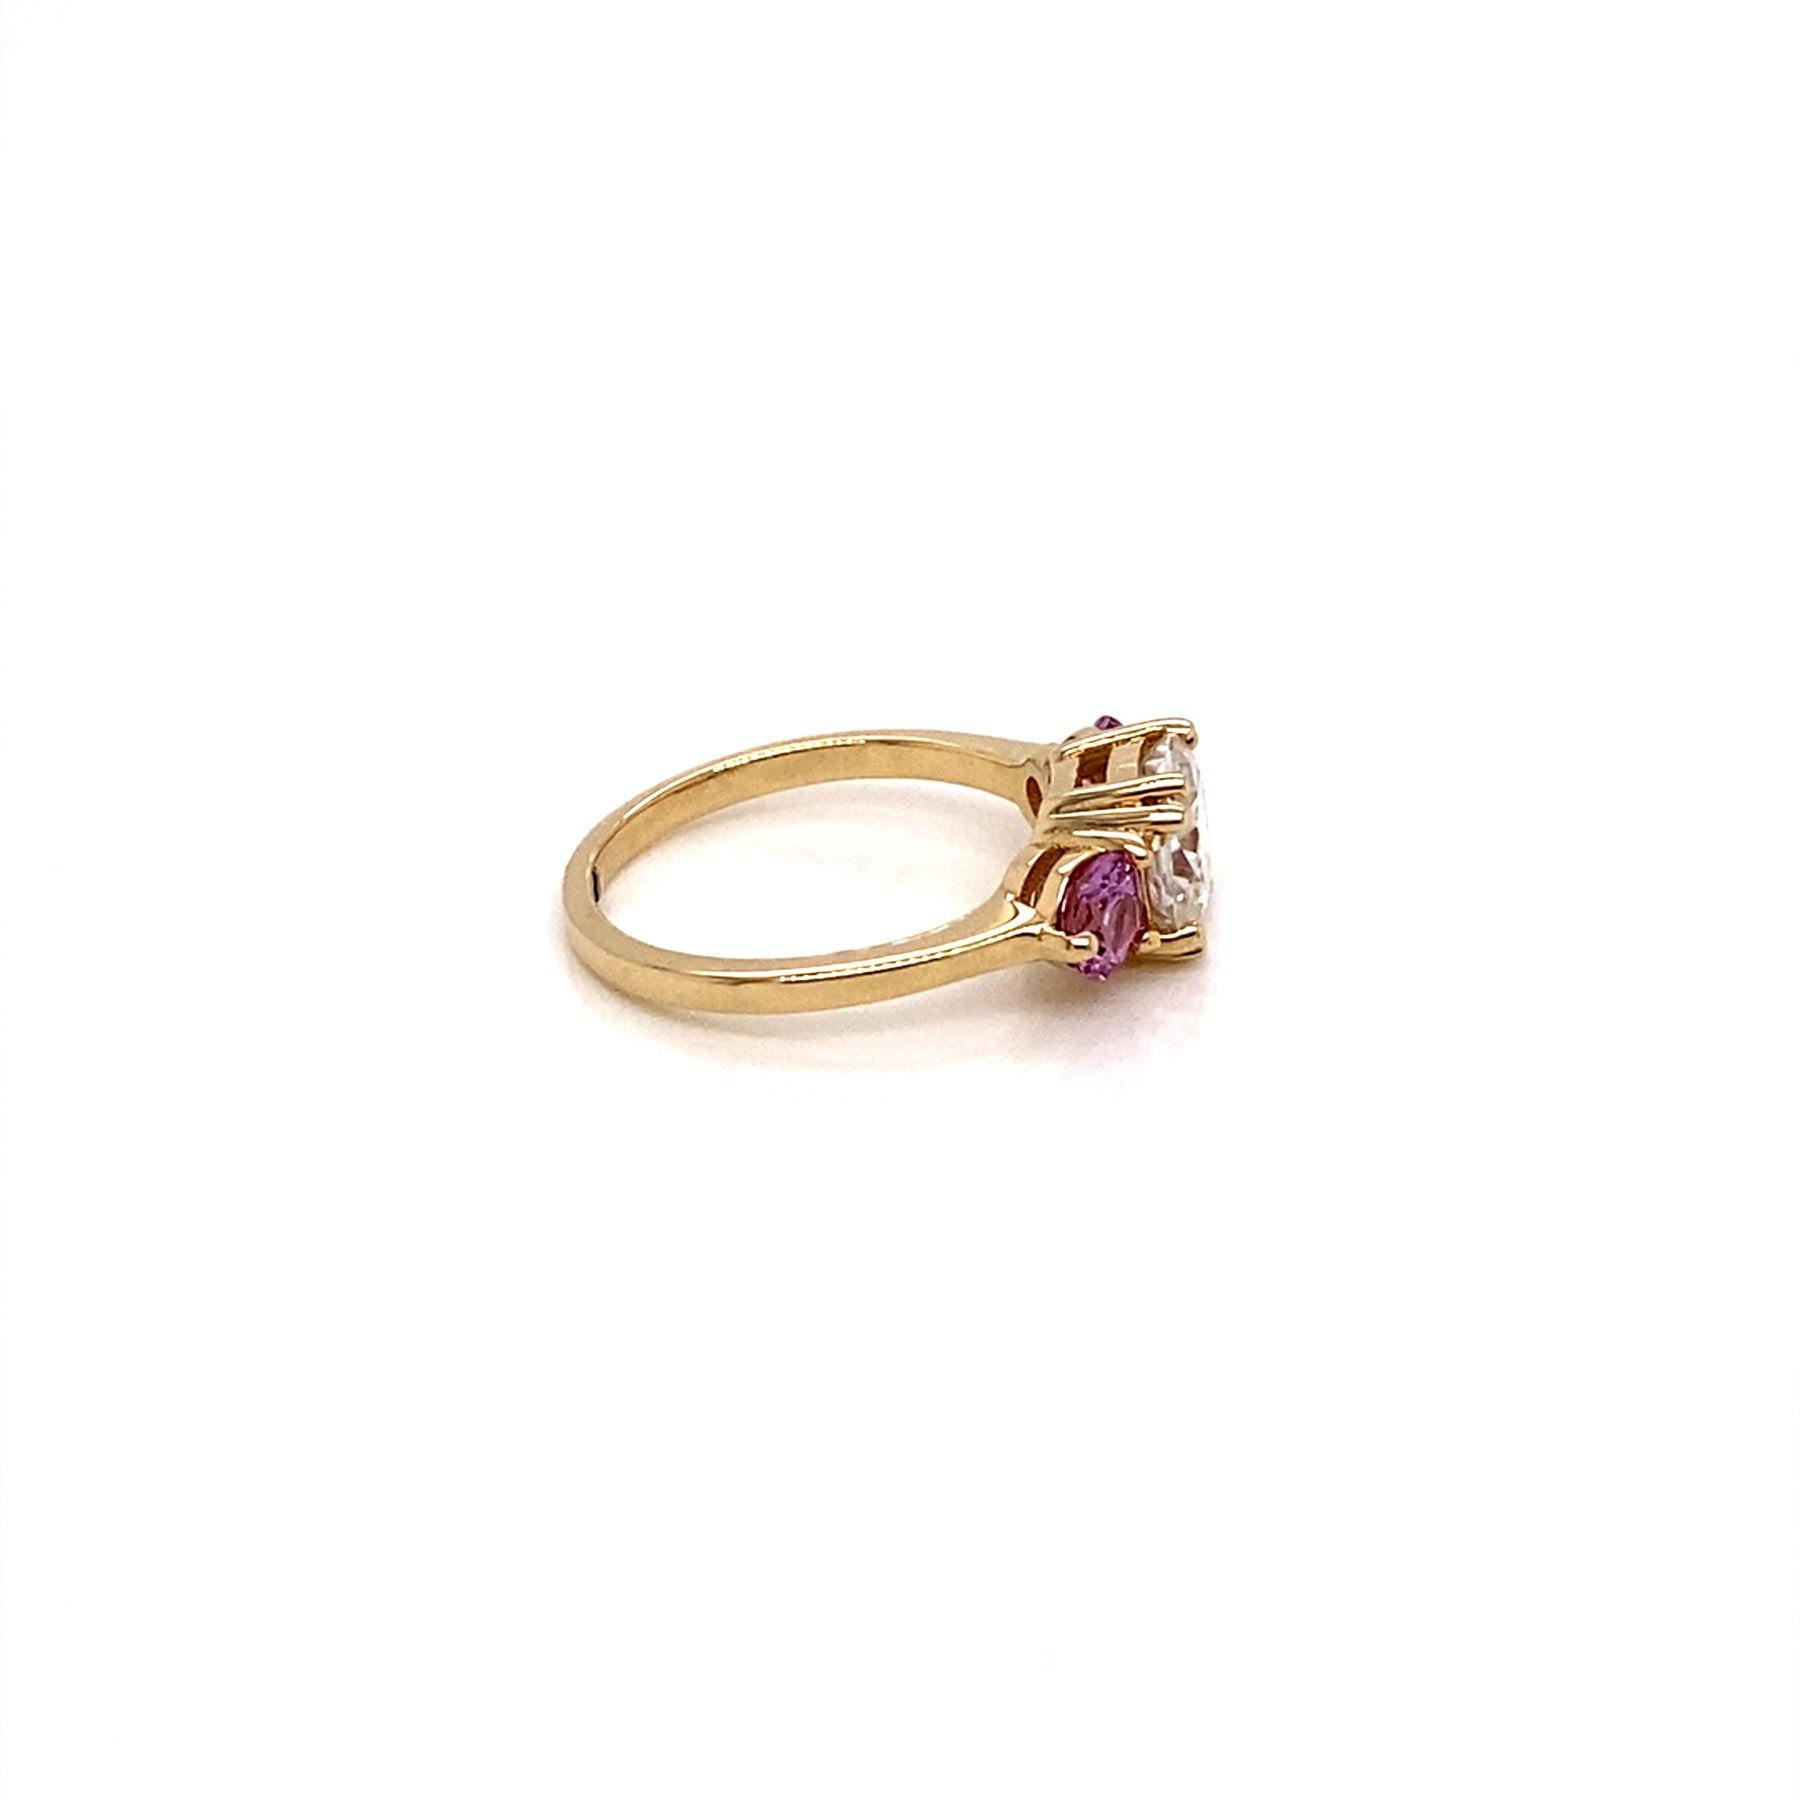 Three-Stone rings features  Cushion Cut Moissanite and two natural round pink sapphires